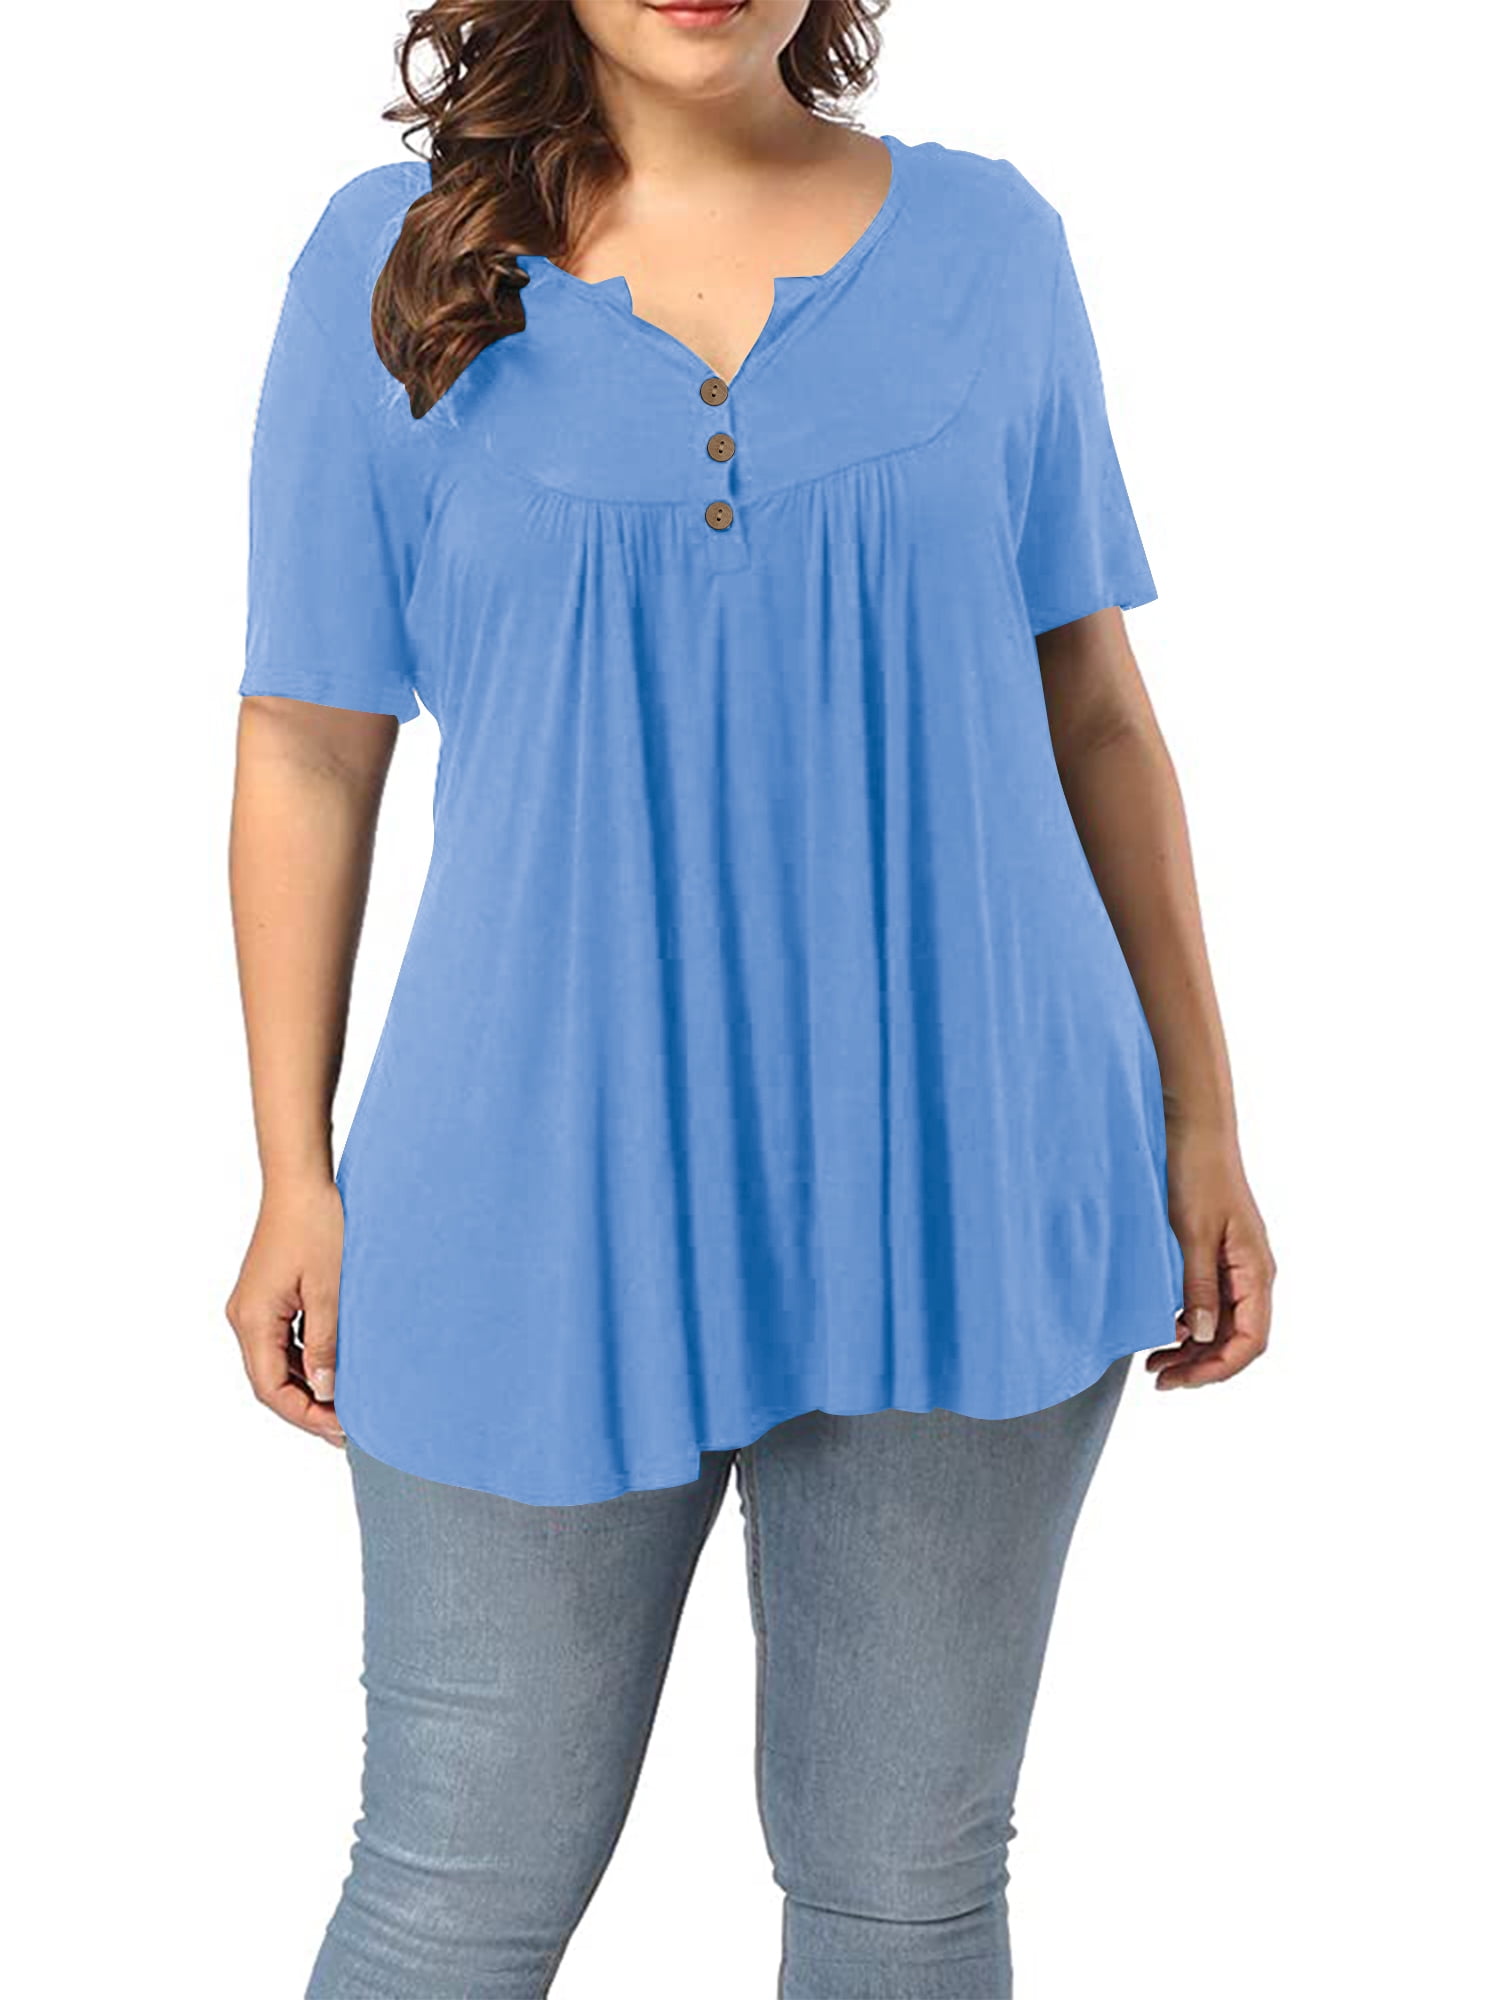 Women's Plus Size V-neck Short Sleeve Henley Shirts Buttons Up